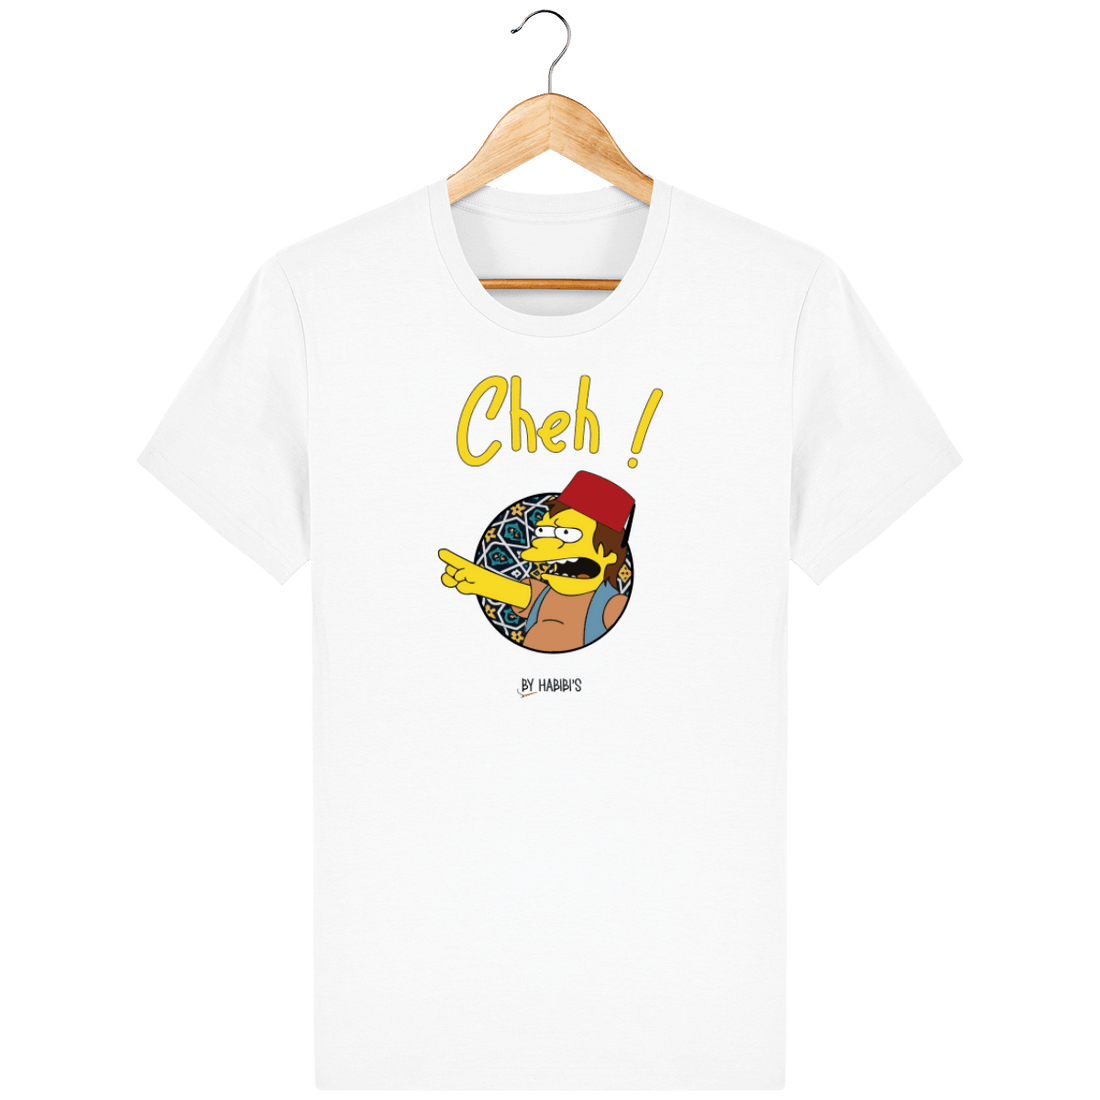 Homme>Tee-shirts - T-Shirt Homme <br> Cheh